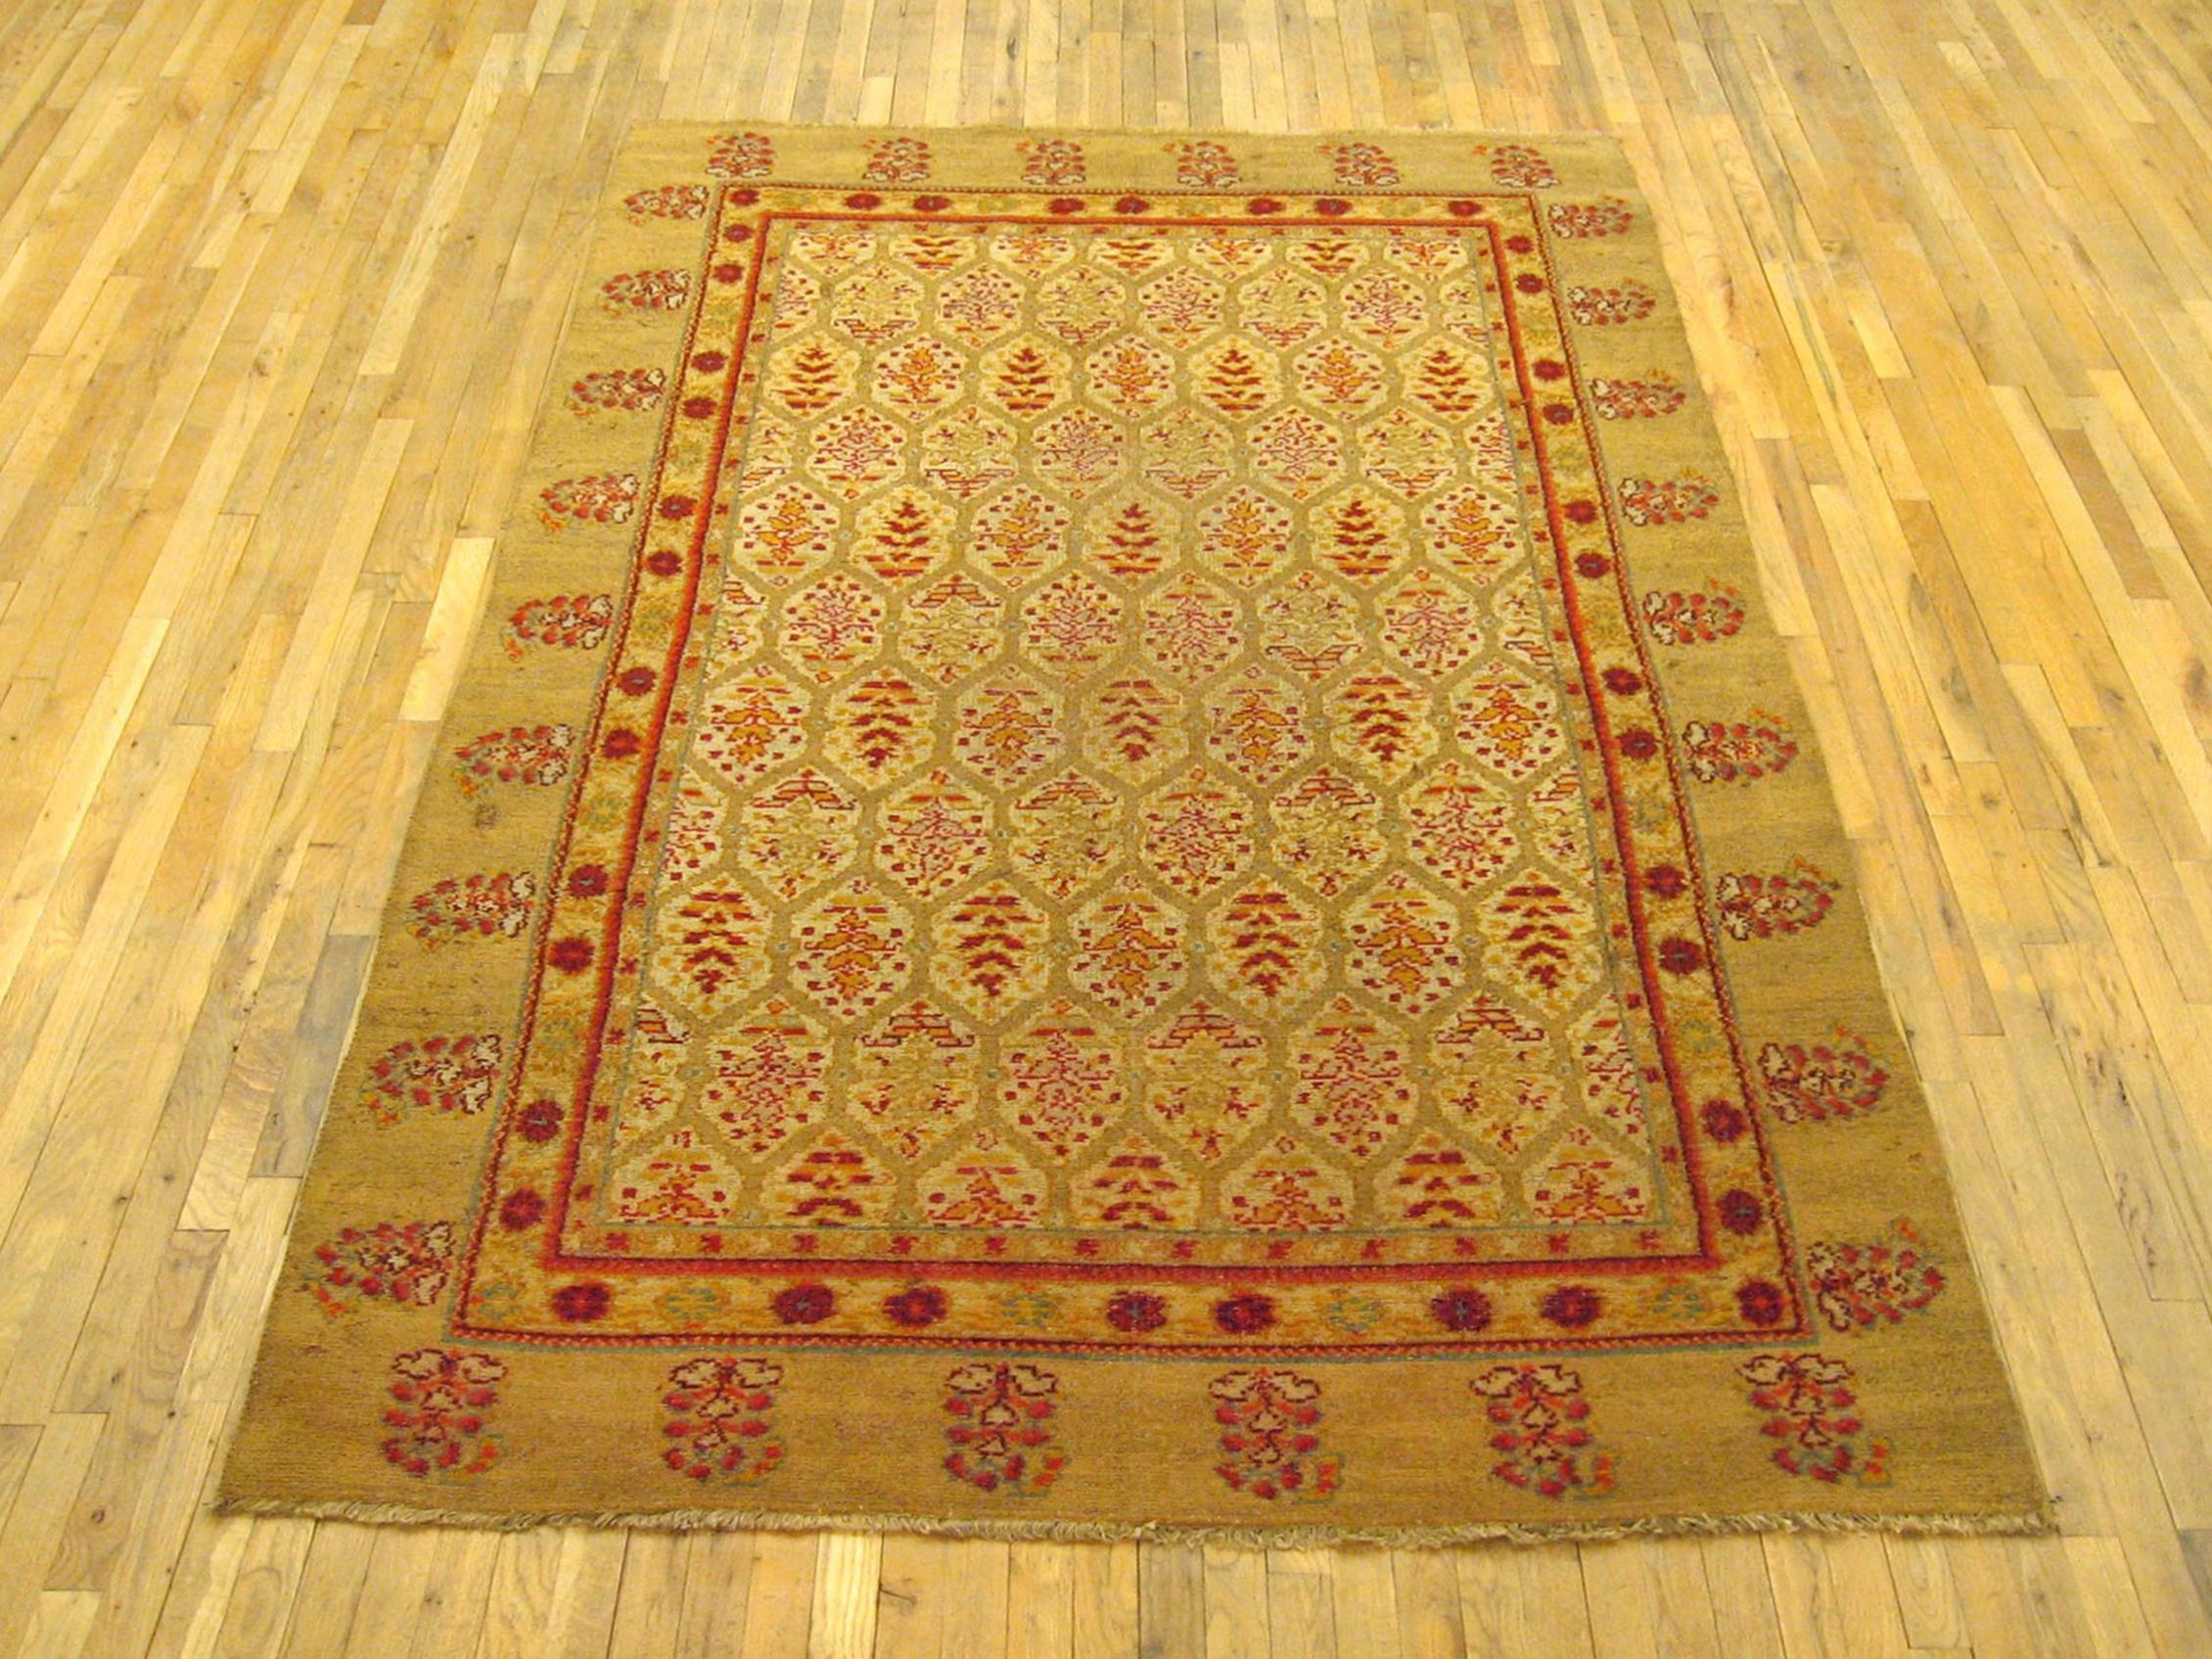 Antique Spanish rug, Room size, circa 1920

A one-of-a-kind antique Spanish Carpet, hand-knotted with short wool pile. This beautiful rug is a unique double-faced carpet with pile on both the front and the back. It features cartouches motifs